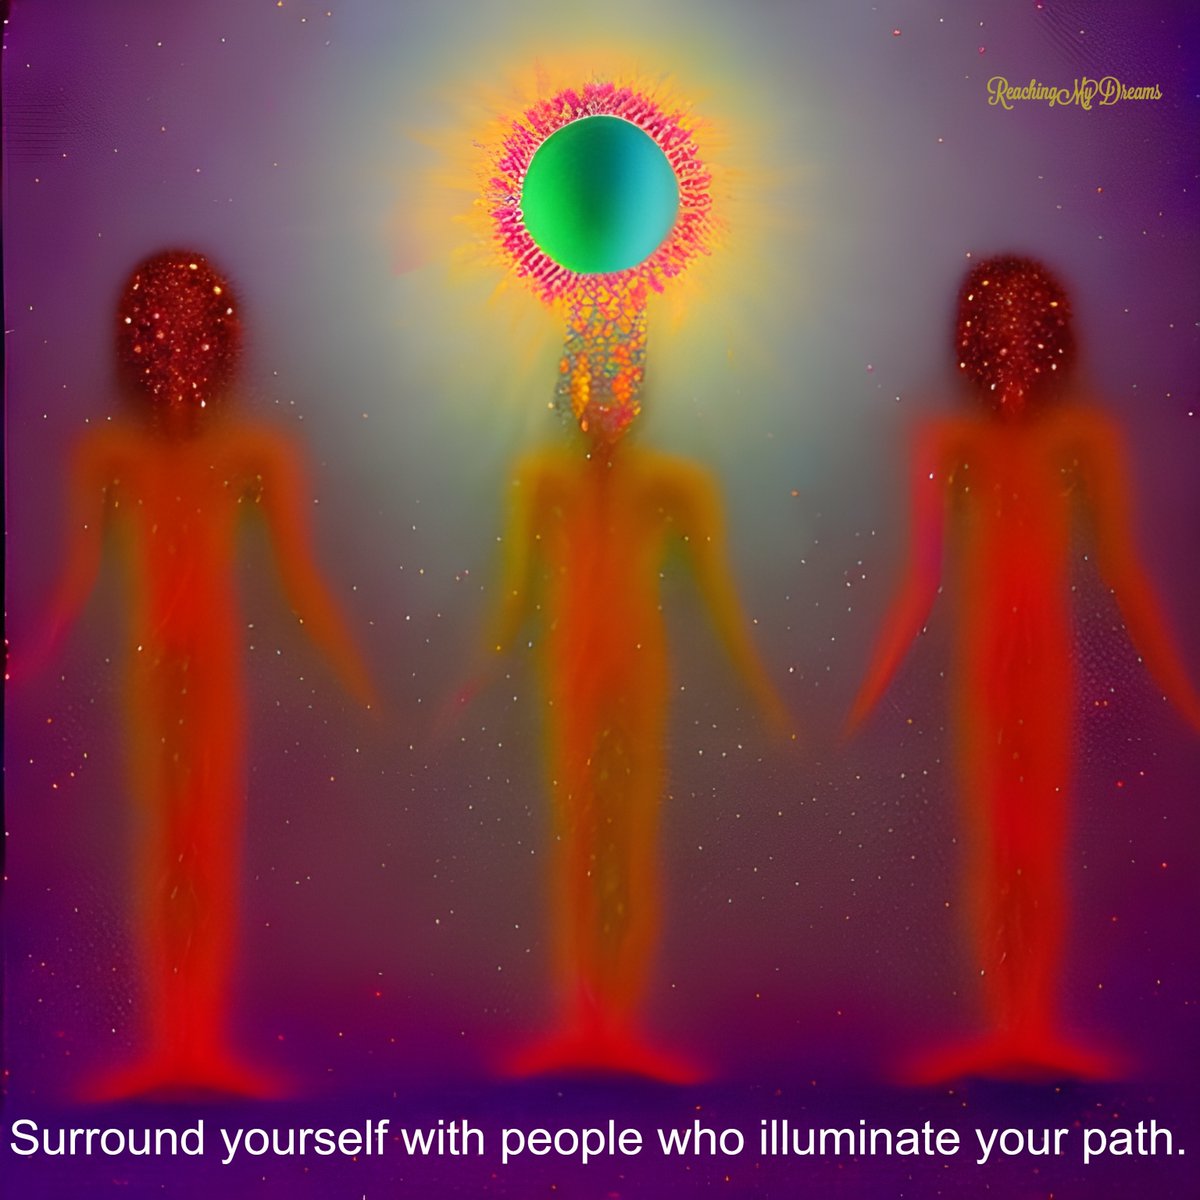 Surround yourself with people who illuminate your path.
.
#PositiveVibesOnly #GoodCompany #ChooseYourTribe #FriendsThatInspire #InspirationEverywhere #MotivationMonday #AIart #NewAgeQuotes #DigitalWisdom #AIgenerated #ArtificialIntelligence #MachineLearning #Enlightenment